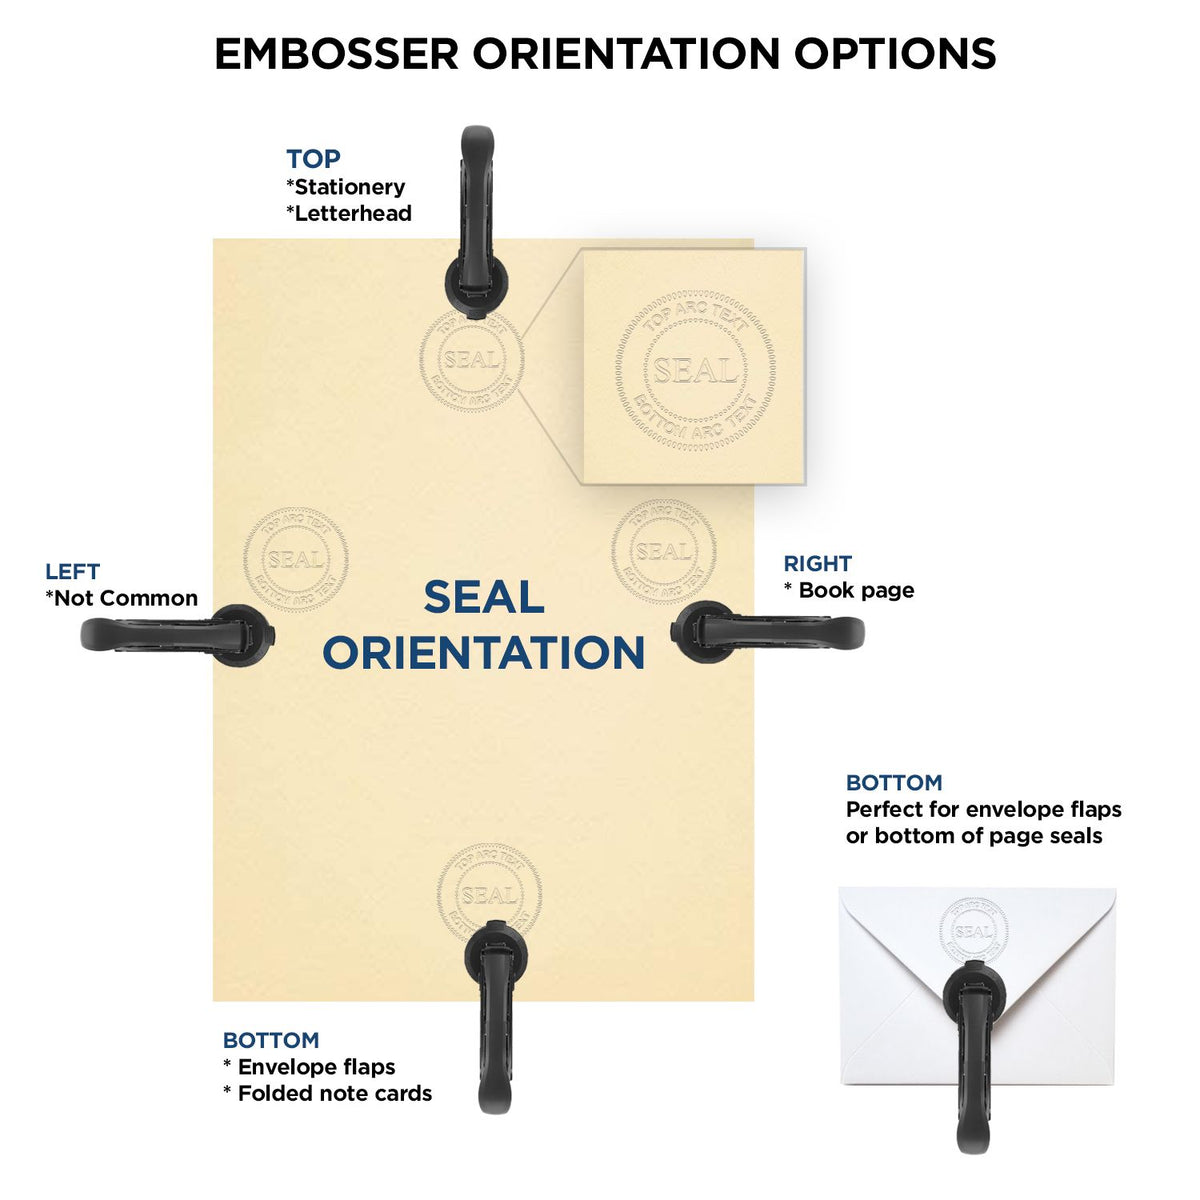 An infographic for the Hybrid Ohio Land Surveyor Seal showing embosser orientation, this is showing examples of a top, bottom, right and left insert.